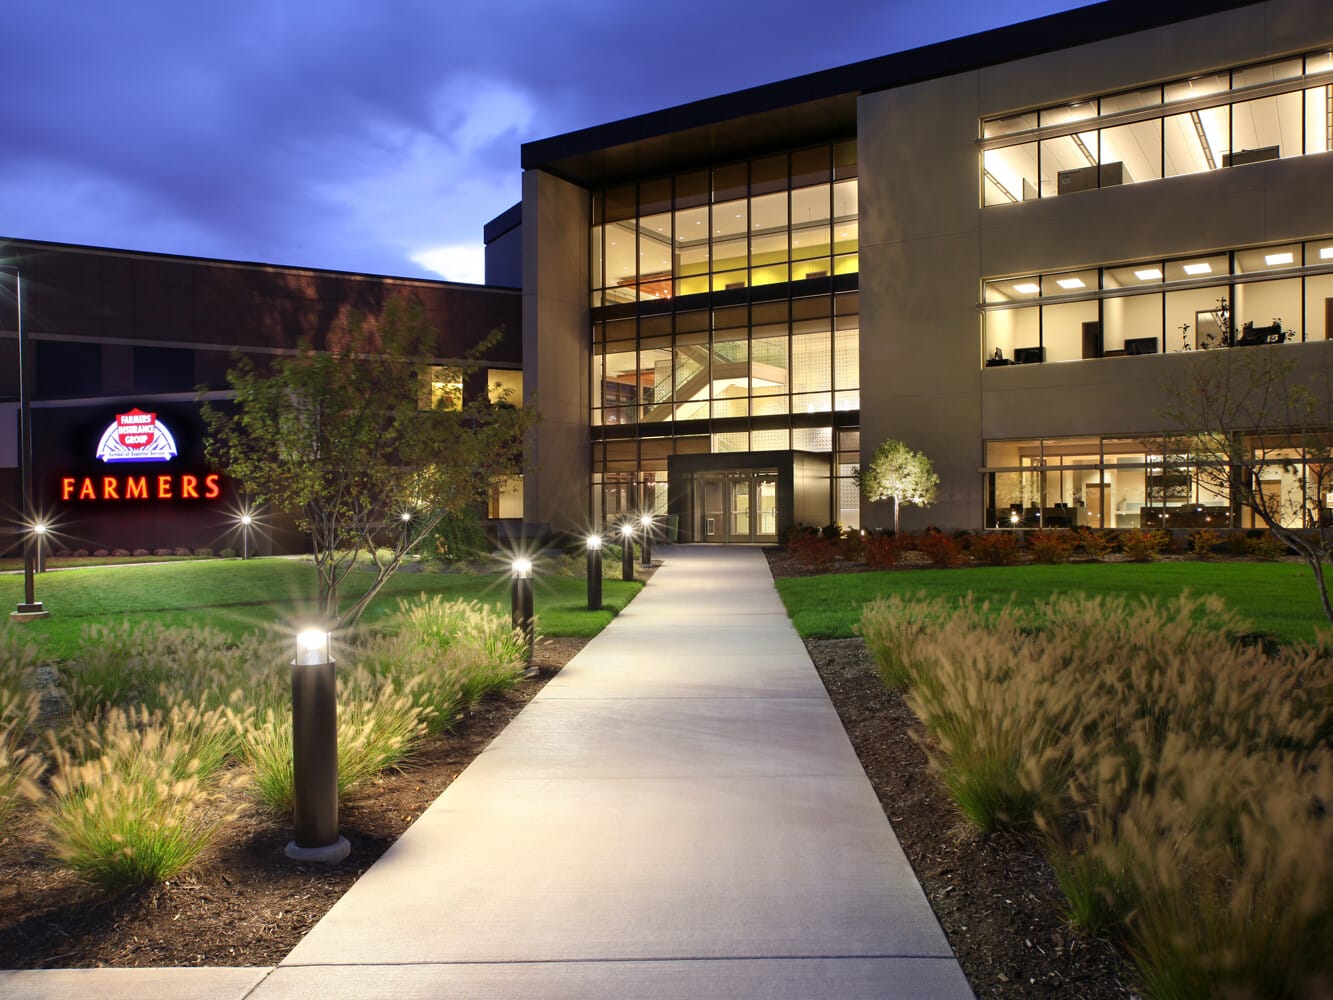 Exterior view of a modern office building at dusk, featuring illuminated signage, well-lit walkways, and landscaped areas available for sale leasebacks.